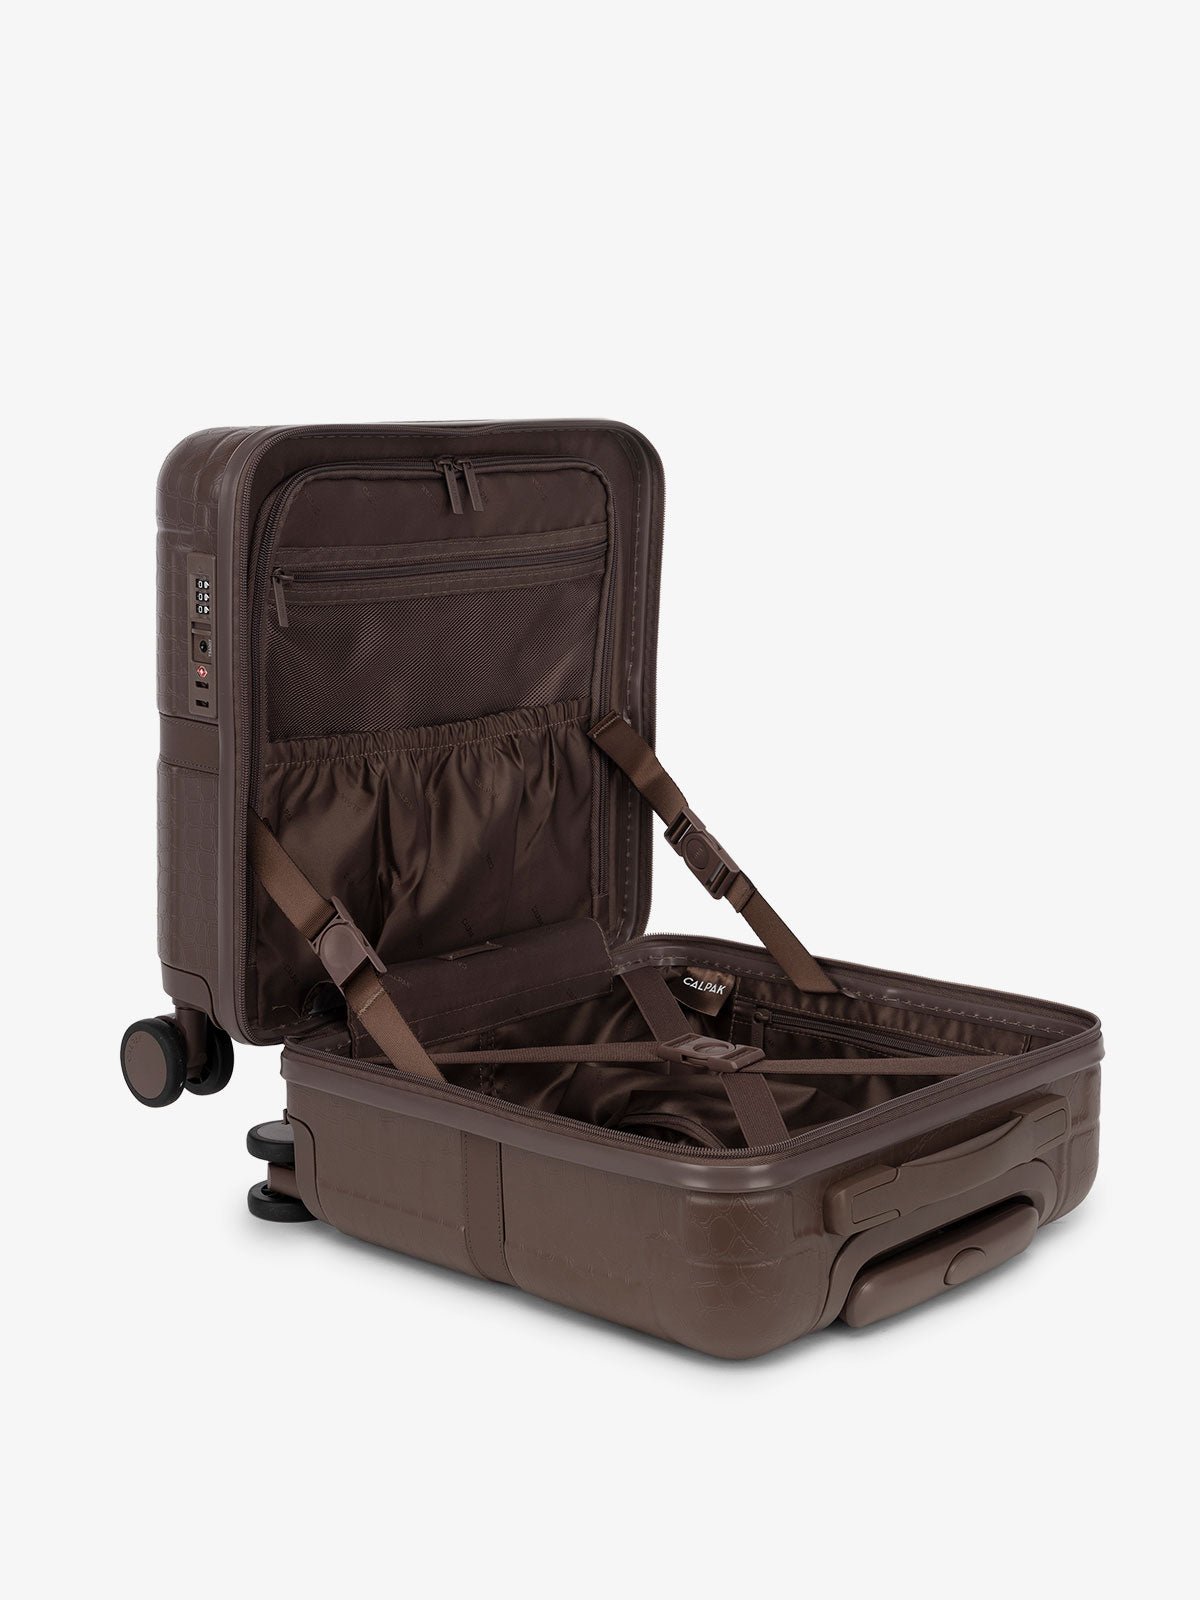 CALPAK TRNK small carry on luggage with wheels, interior compression strap and multiple pockets in brown